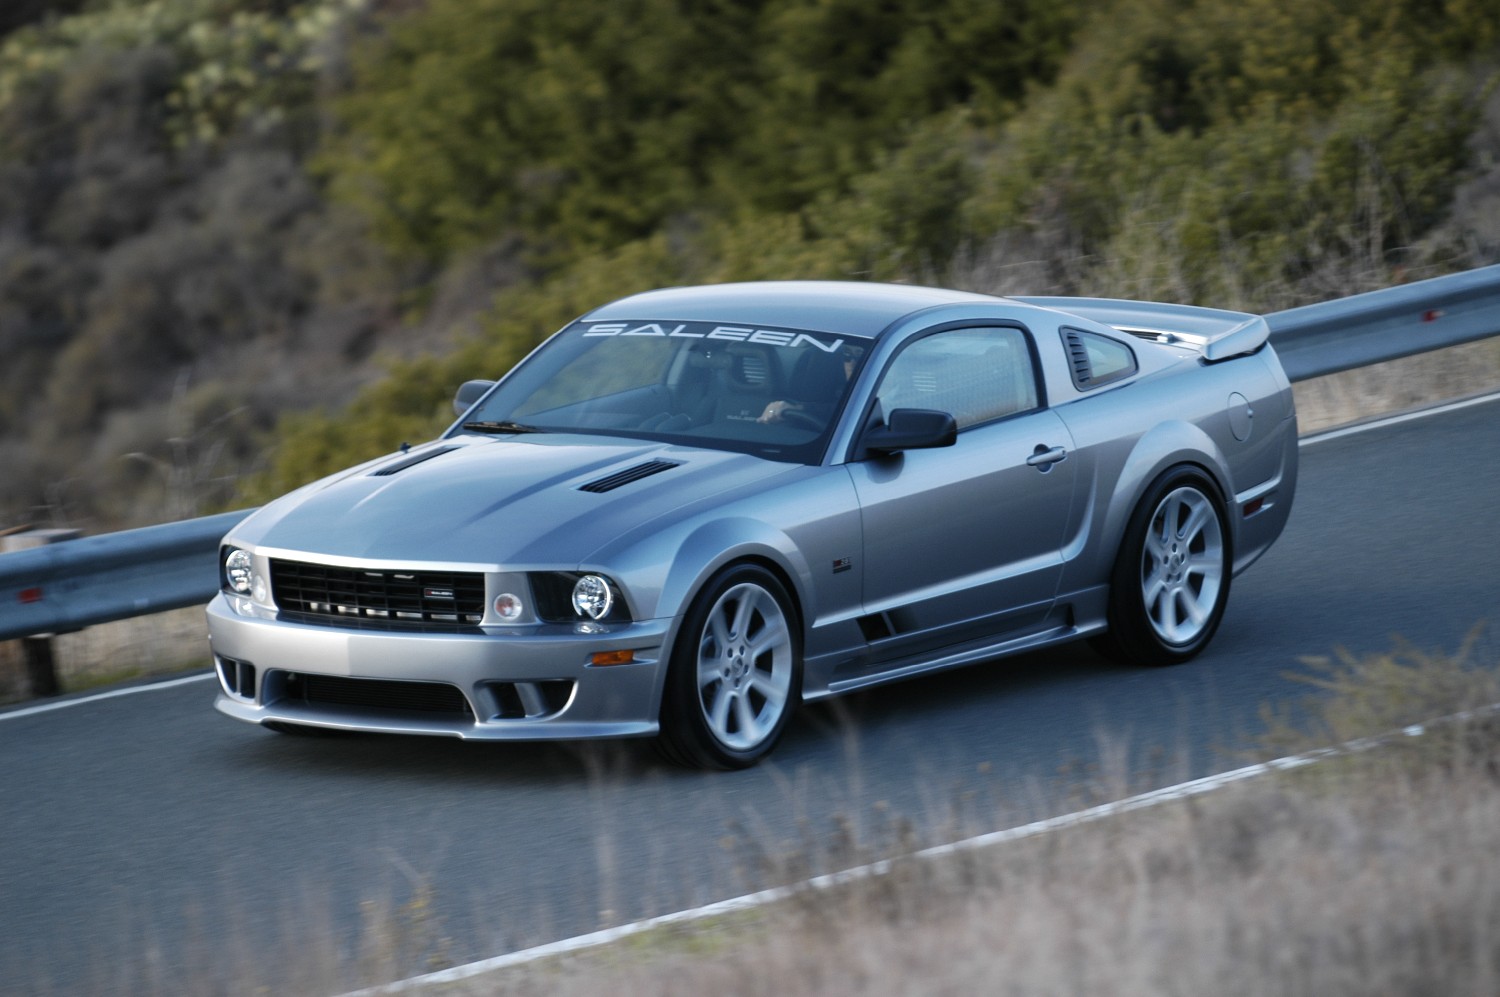 Spectacular new saleen S281 mustang hits the streets.